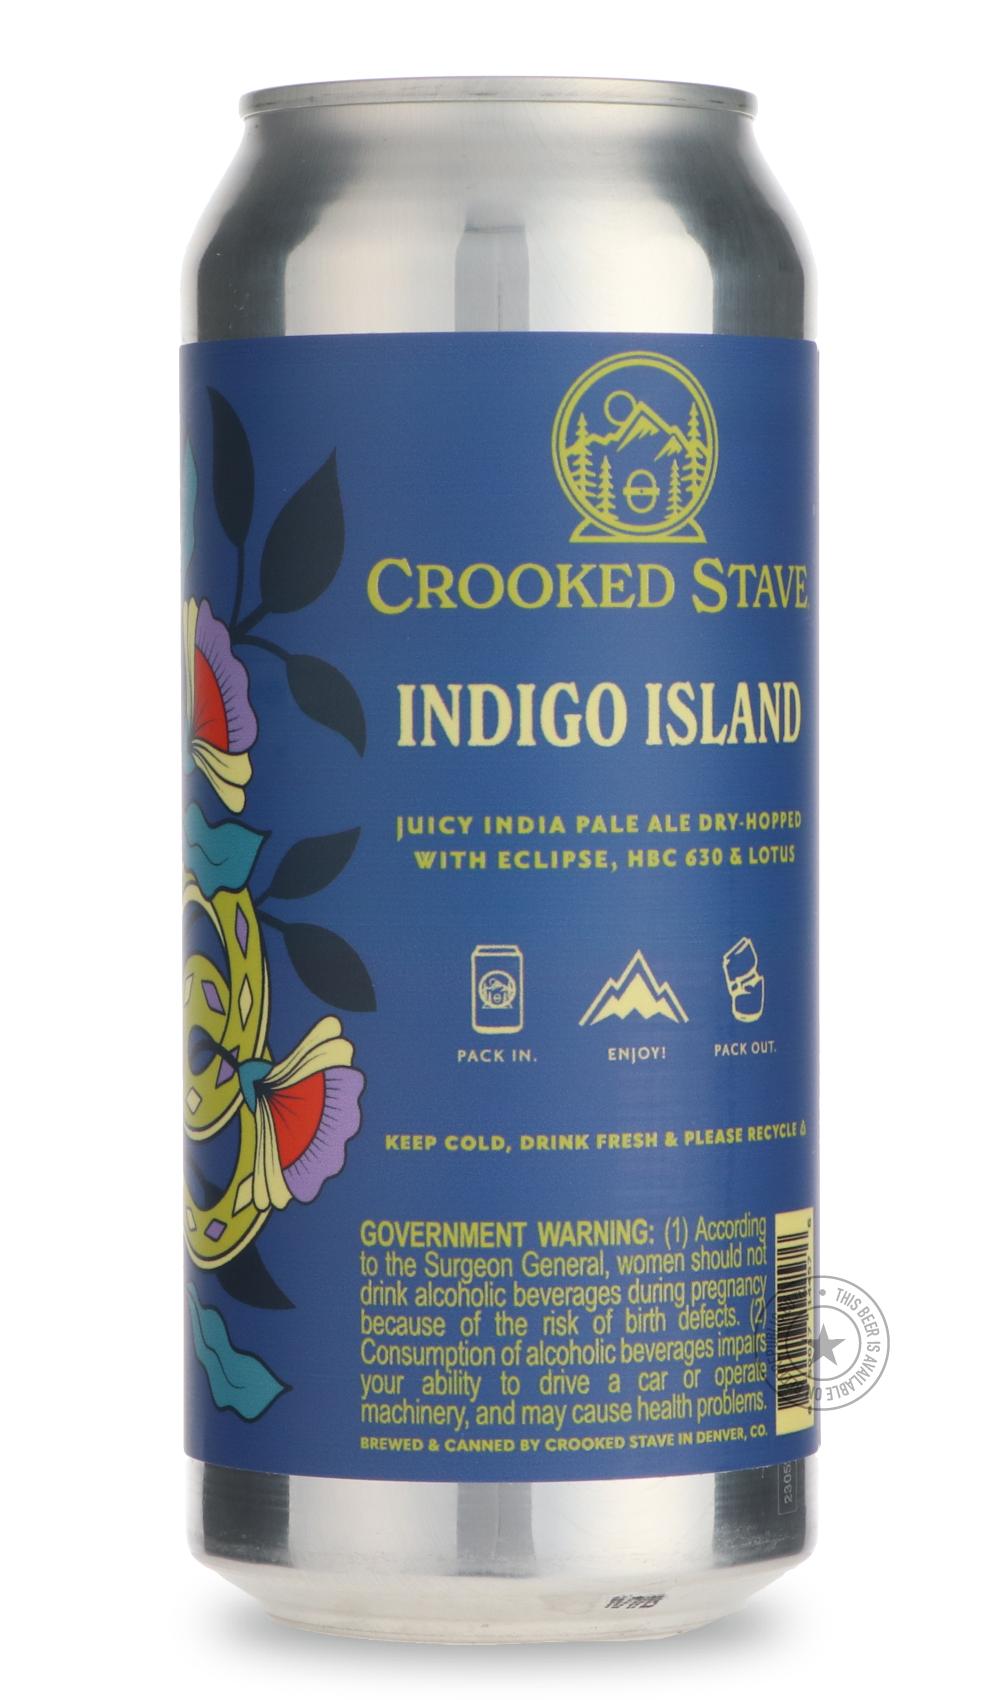 -Crooked Stave- Indigo Island-Sour / Wild & Fruity- Only @ Beer Republic - The best online beer store for American & Canadian craft beer - Buy beer online from the USA and Canada - Bier online kopen - Amerikaans bier kopen - Craft beer store - Craft beer kopen - Amerikanisch bier kaufen - Bier online kaufen - Acheter biere online - IPA - Stout - Porter - New England IPA - Hazy IPA - Imperial Stout - Barrel Aged - Barrel Aged Imperial Stout - Brown - Dark beer - Blond - Blonde - Pilsner - Lager - Wheat - Wei